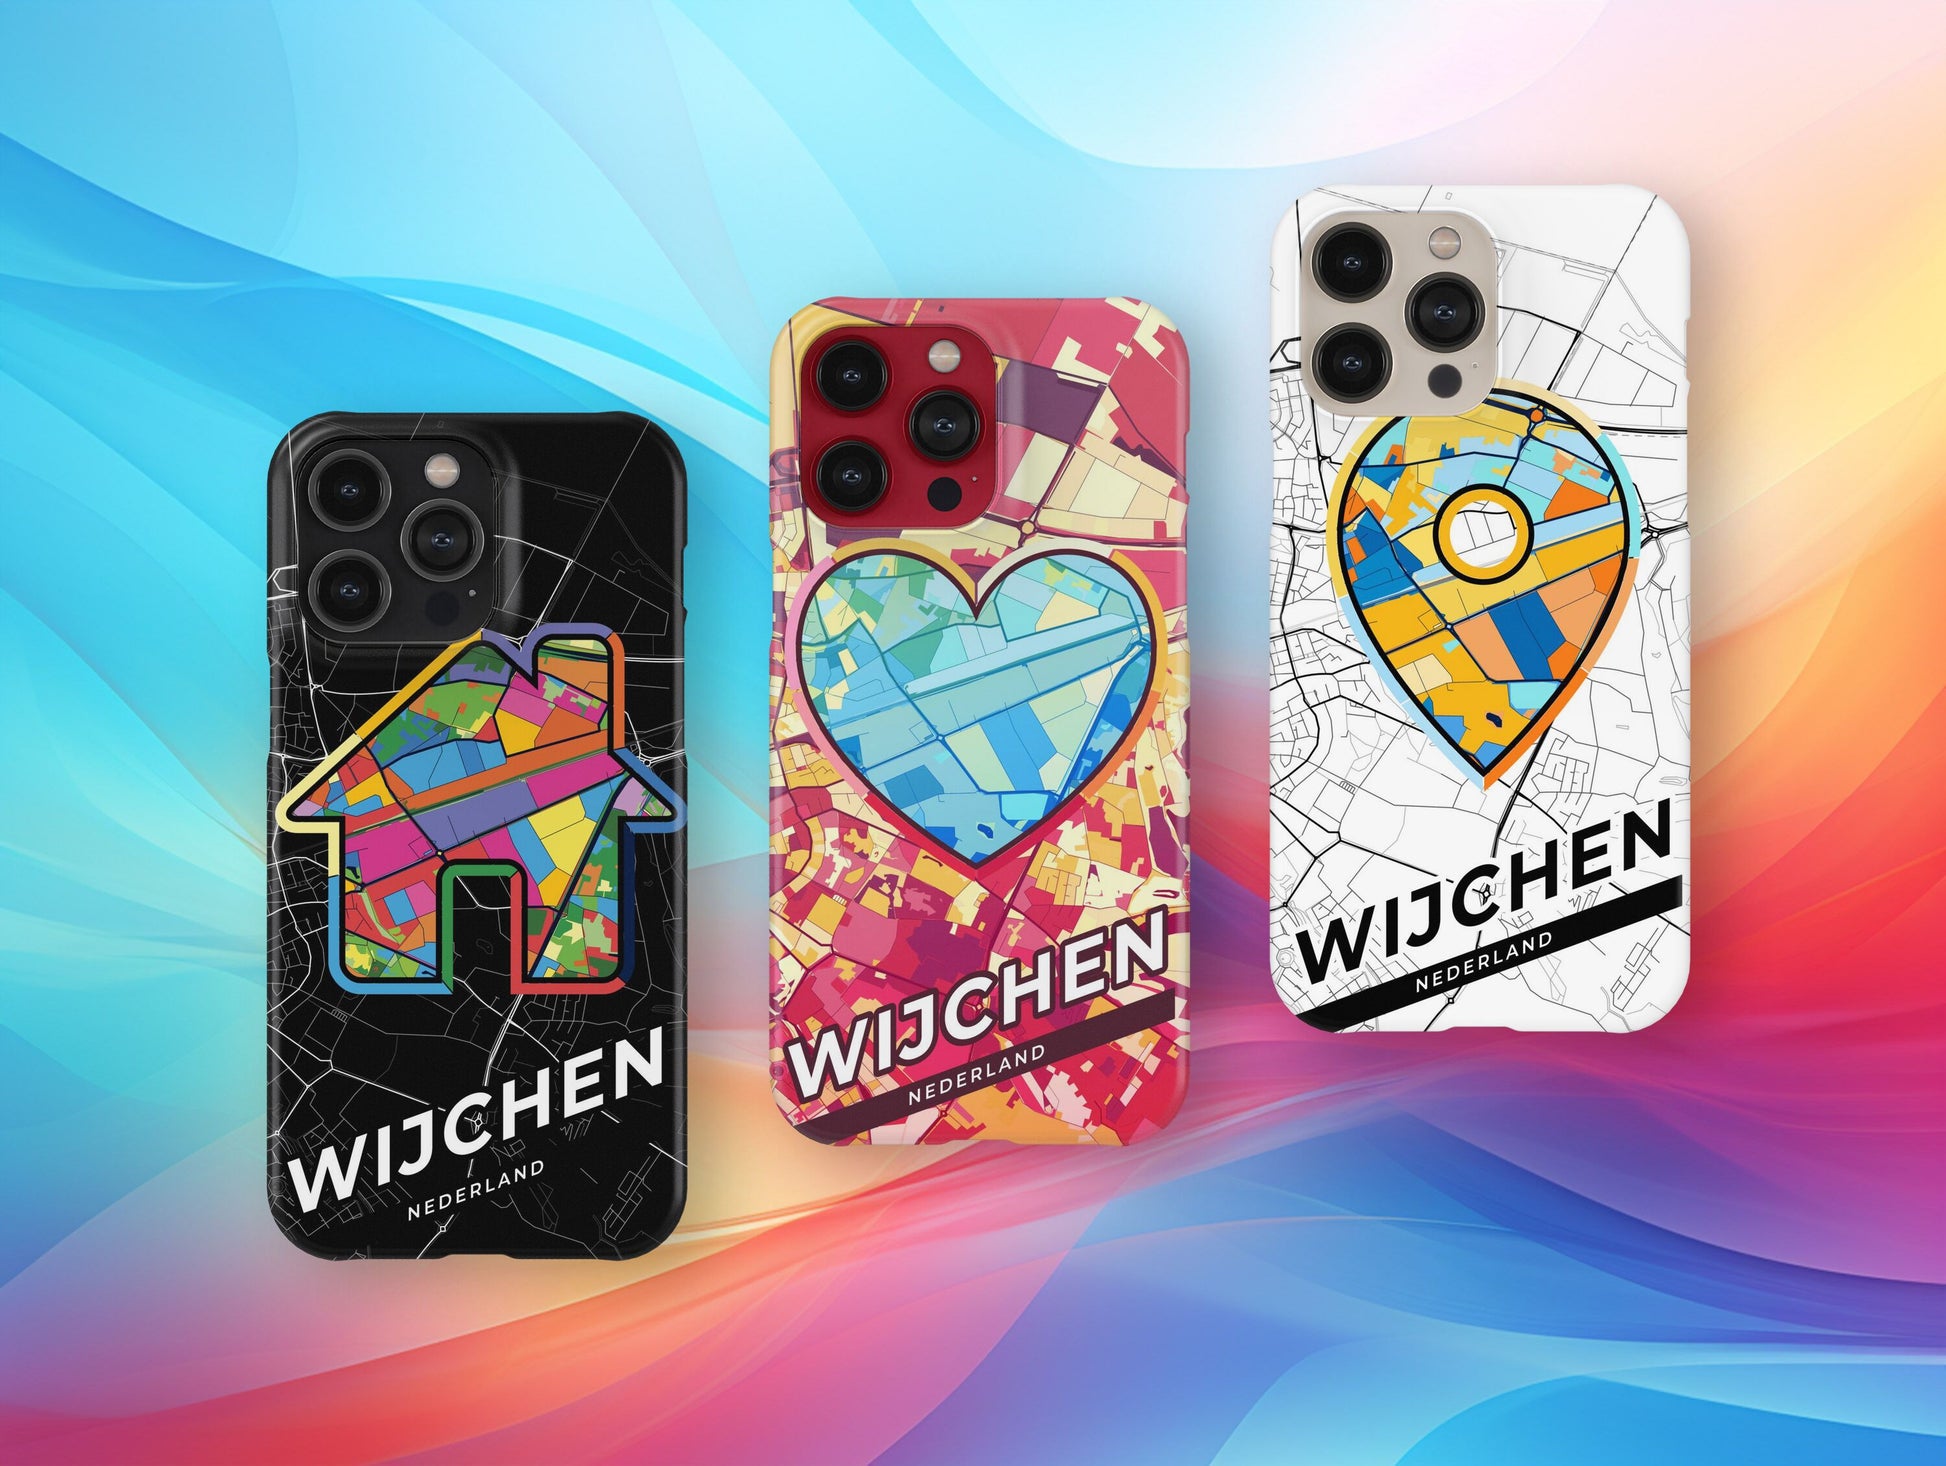 Wijchen Netherlands slim phone case with colorful icon